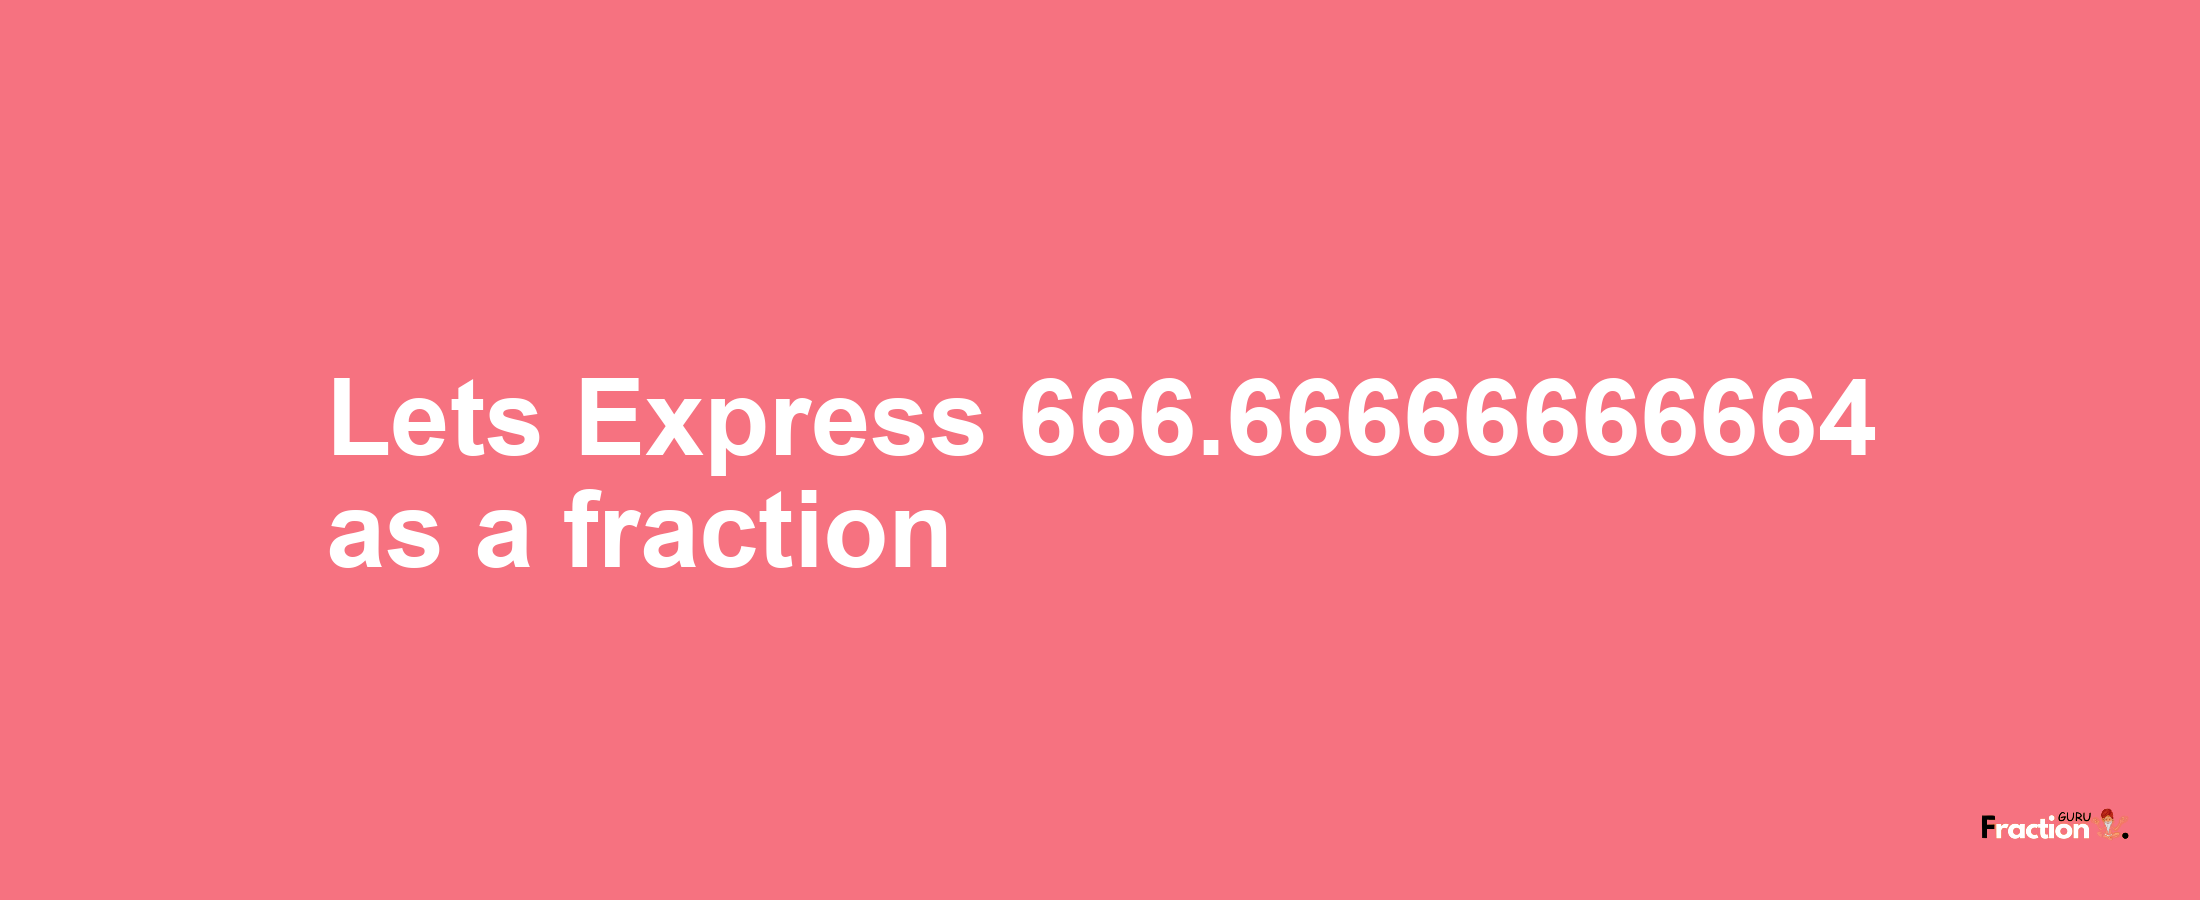 Lets Express 666.66666666664 as afraction